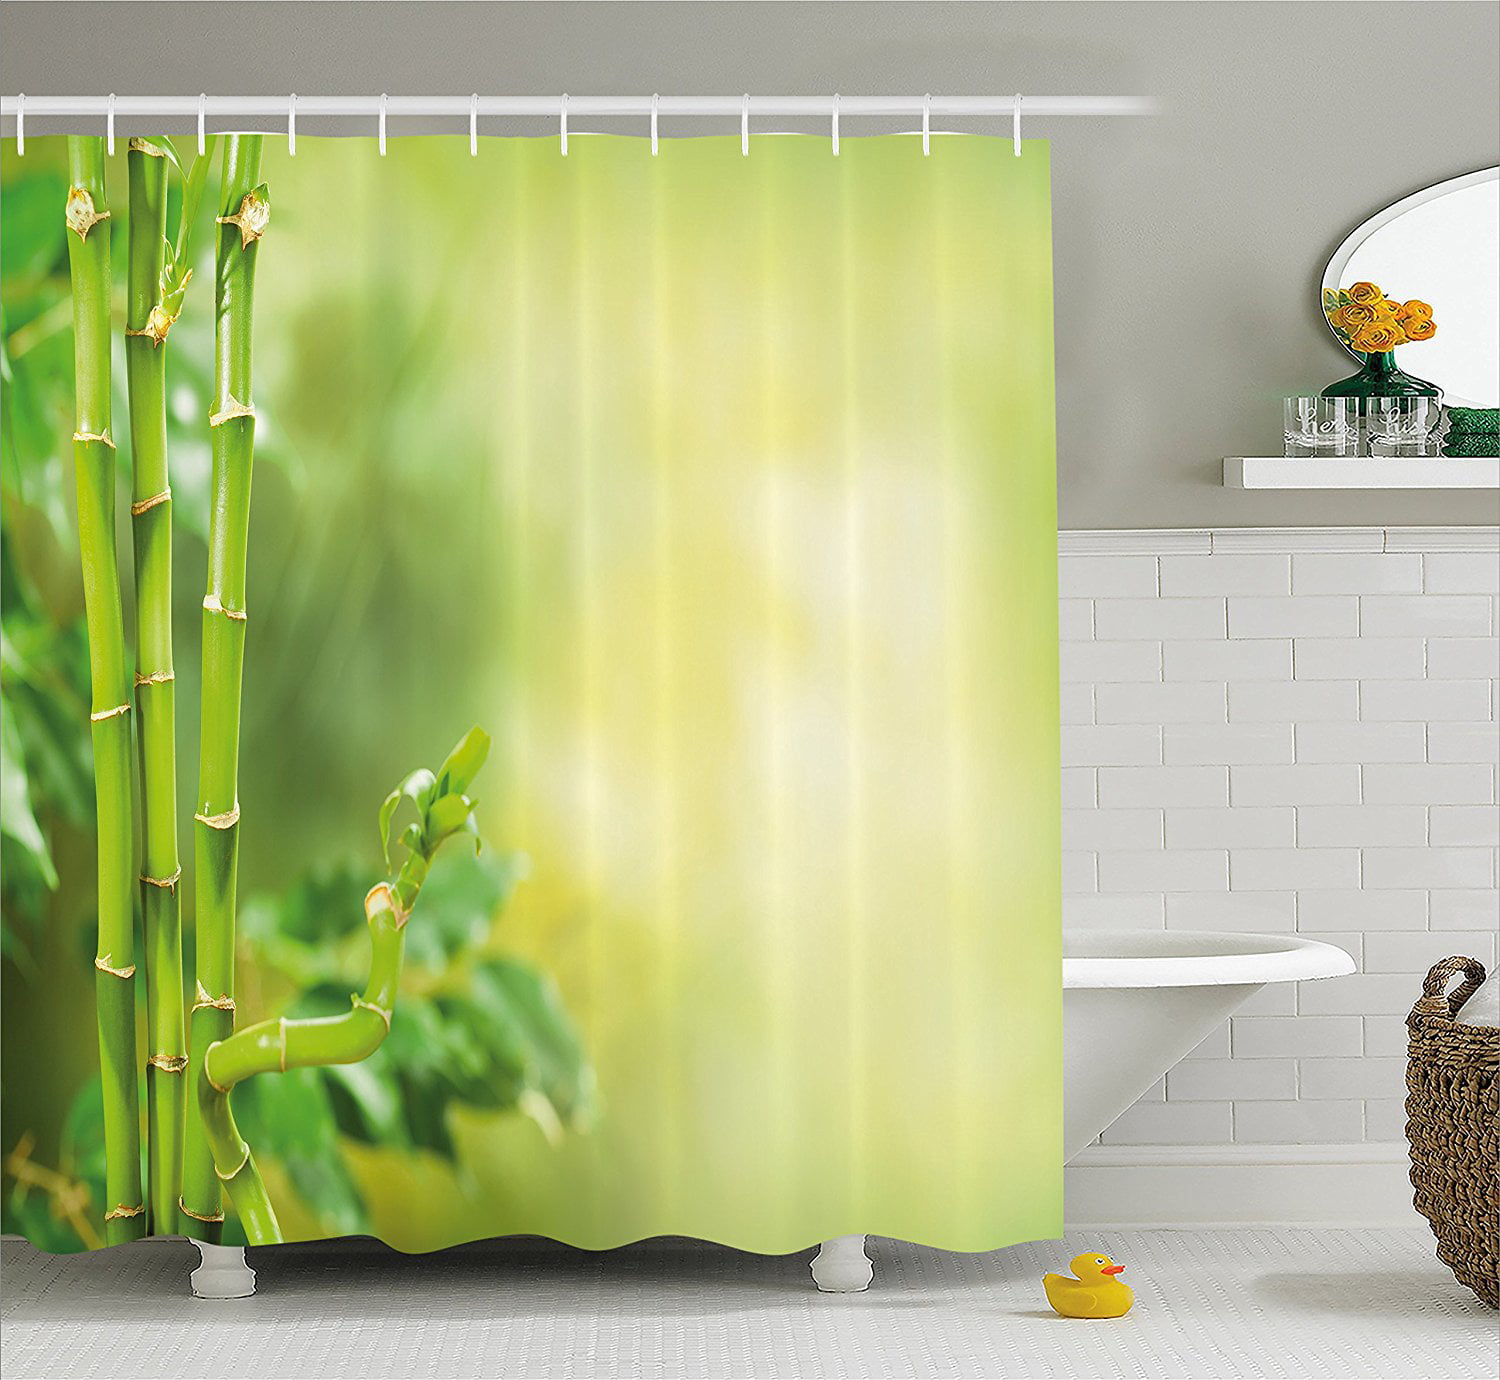 Asian Shower Curtain Spa Spring Water Health Print for Bathroom 70 Inches Long 